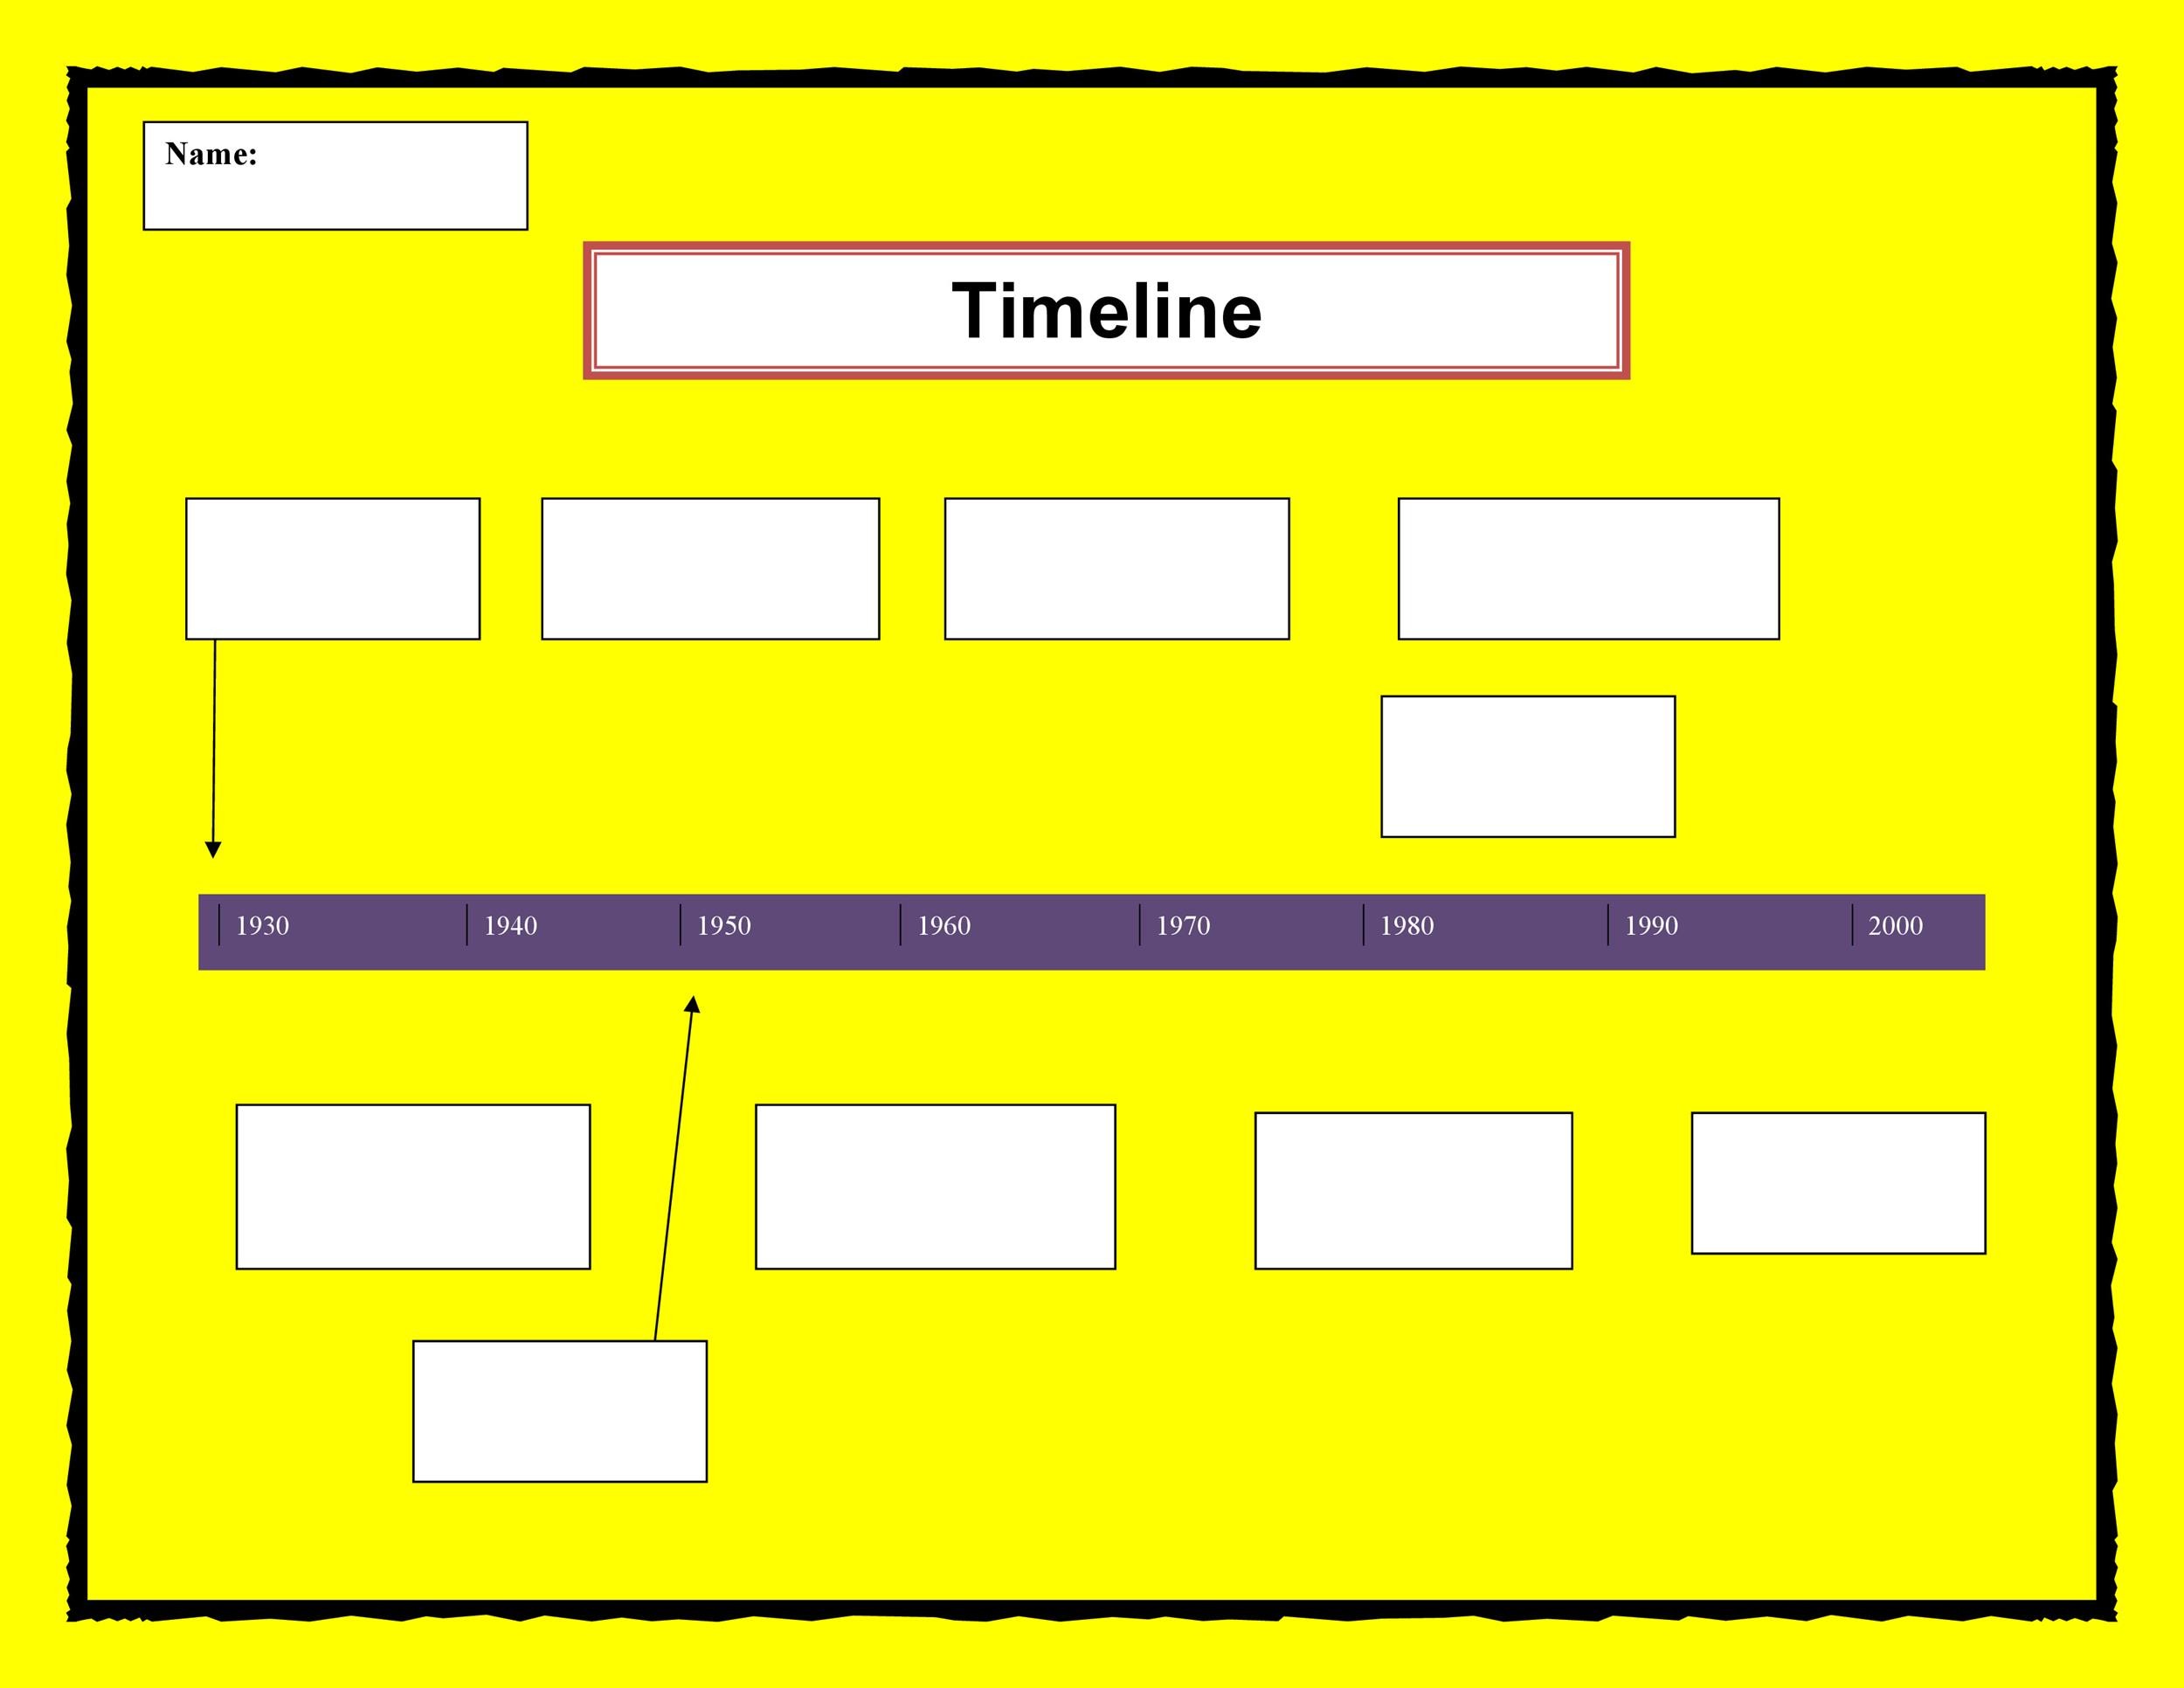 30  Timeline Templates (Excel Power Point Word) ᐅ TemplateLab